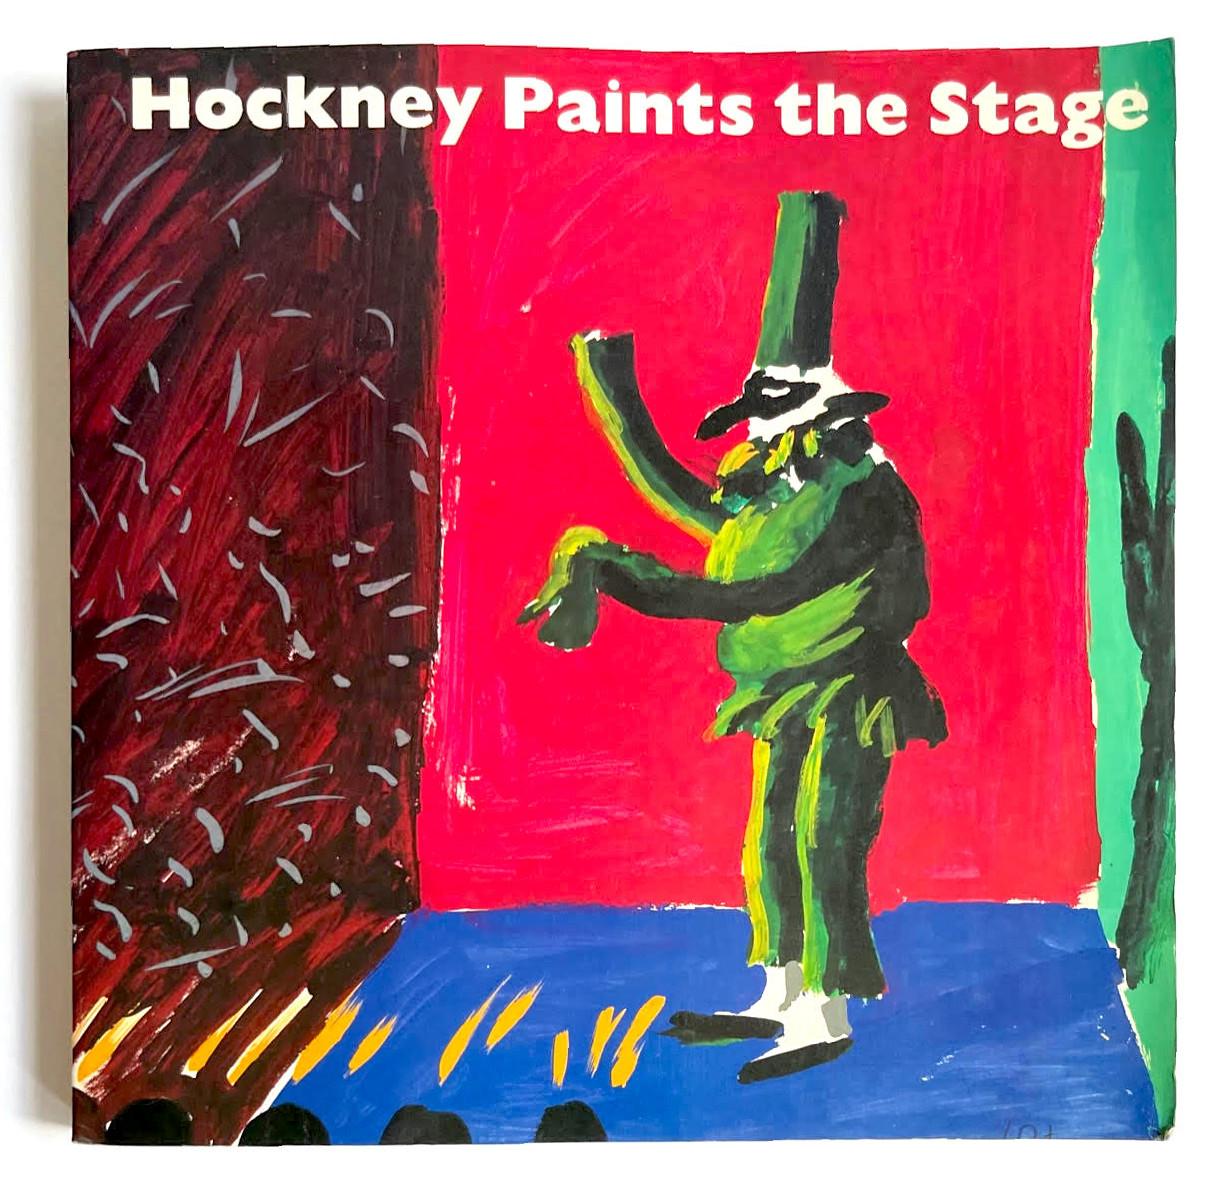 Hockney Paints the Stage (Hand signed and inscribed with doodle of French flag) - Pop Art Print by David Hockney